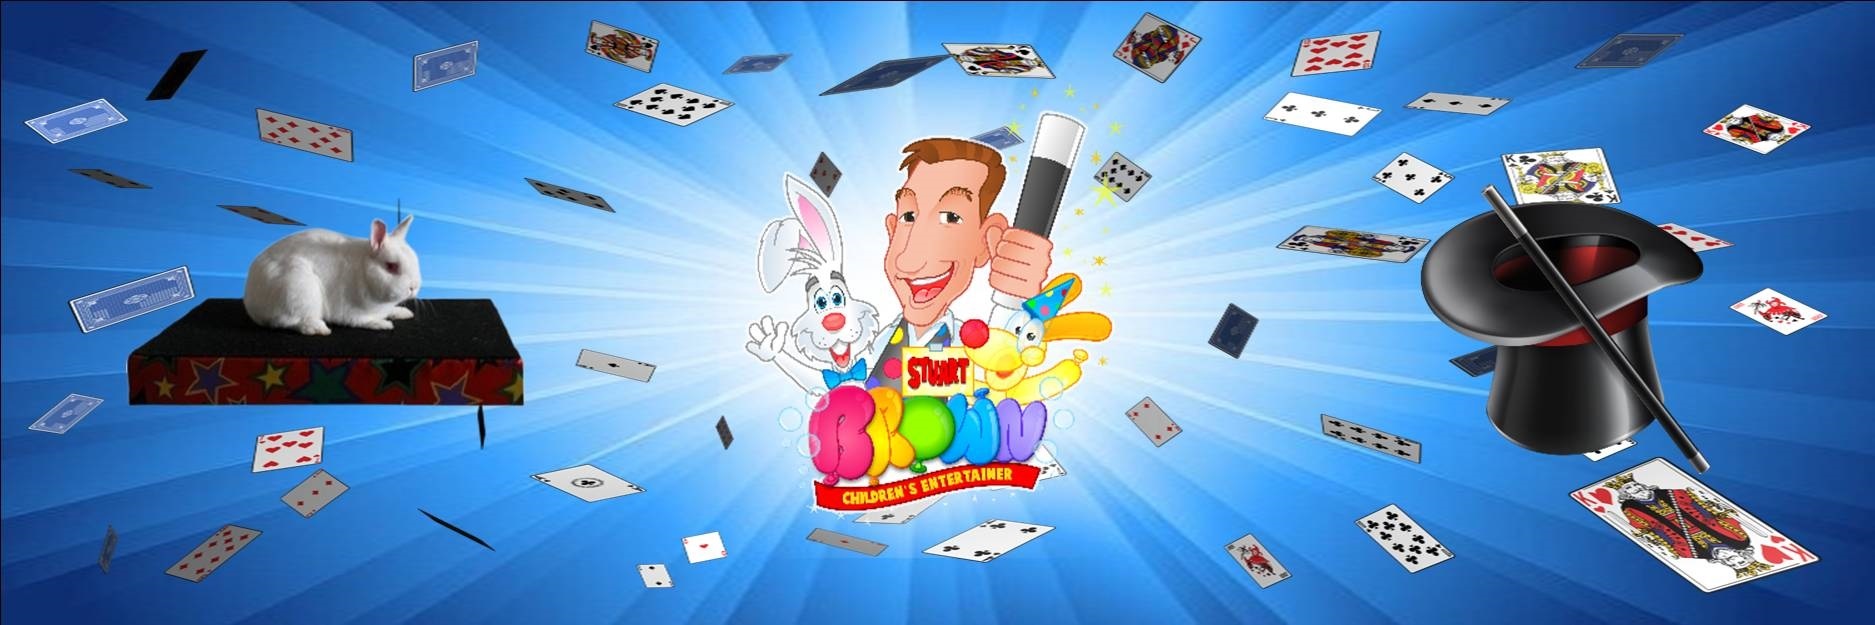 Derby Magic Circle entertainers parties weddings birthdays events